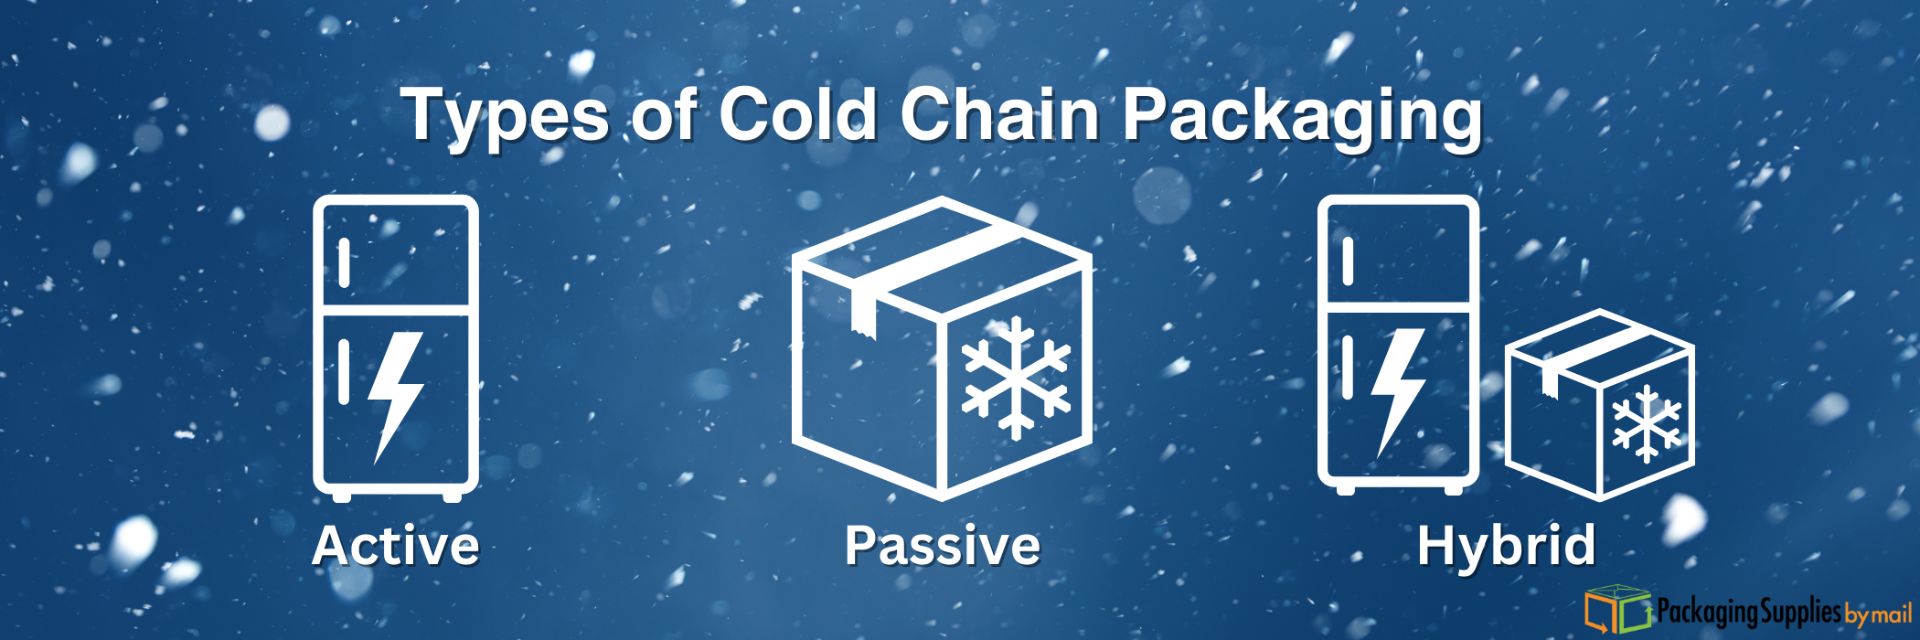 Types of Cold Chain Packaging